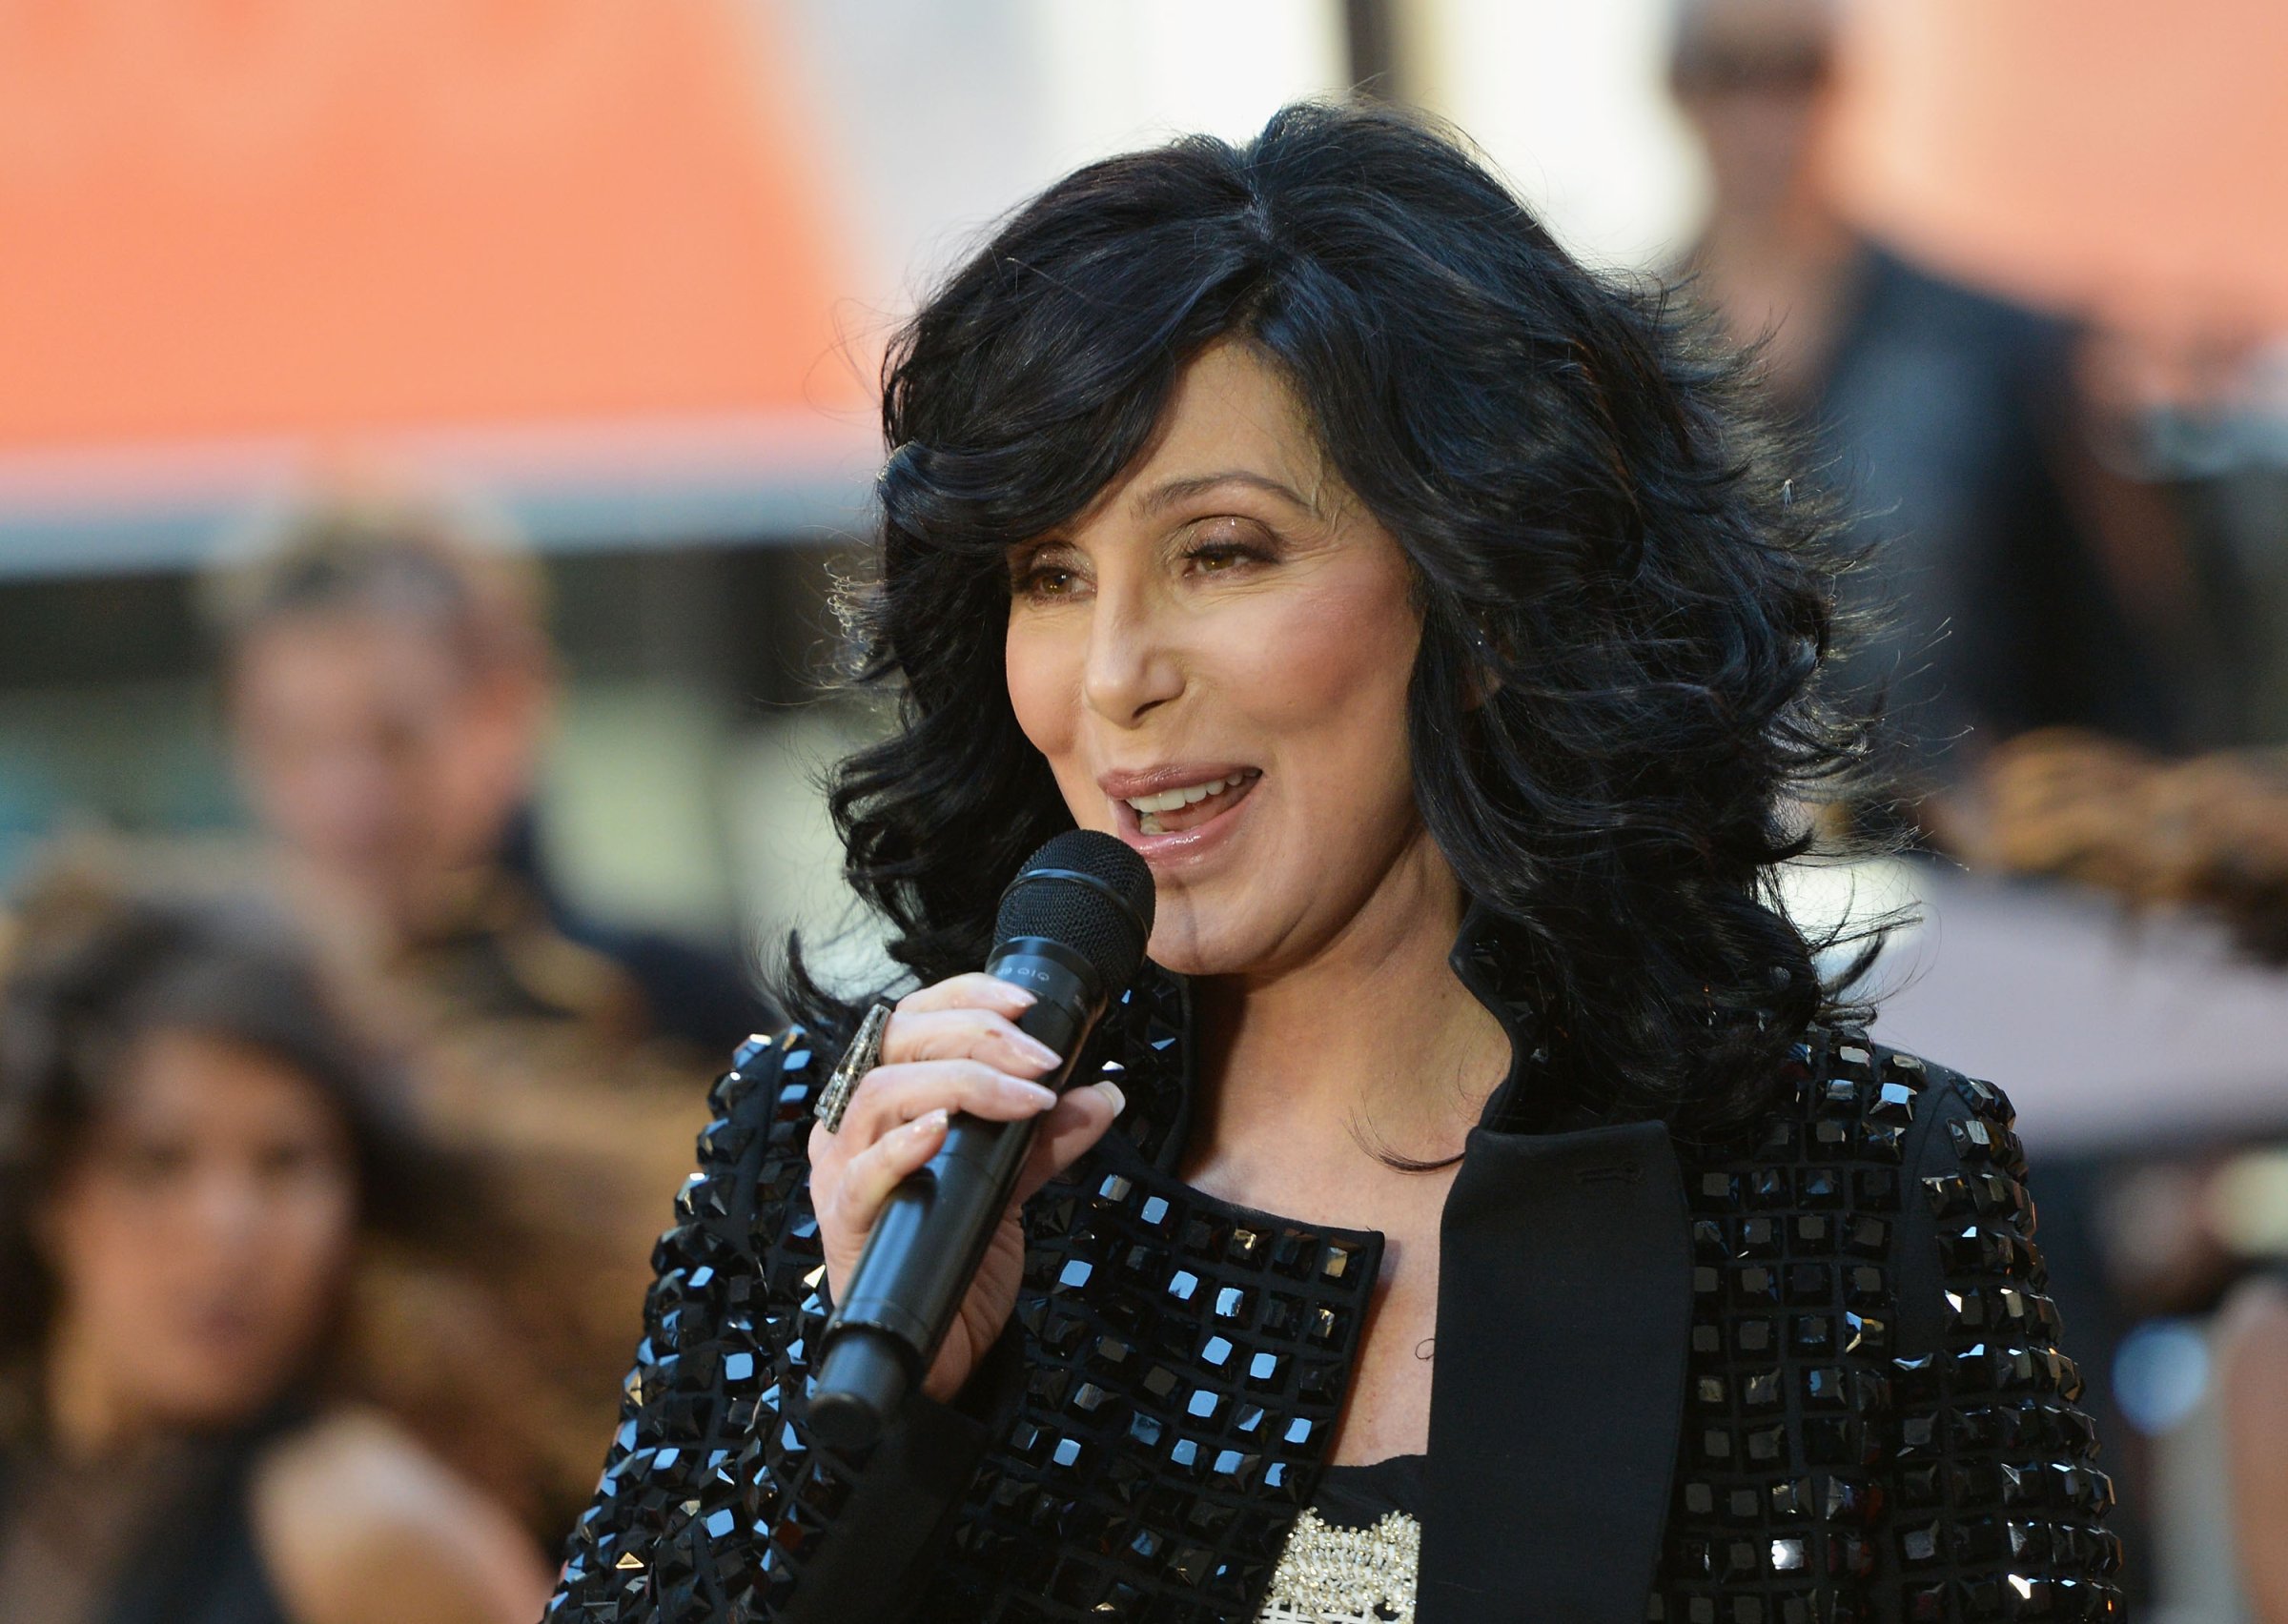 Singer Cher peforms on NBC's "Today" at NBC's TODAY Show in New York City on Sept. 23, 2013.